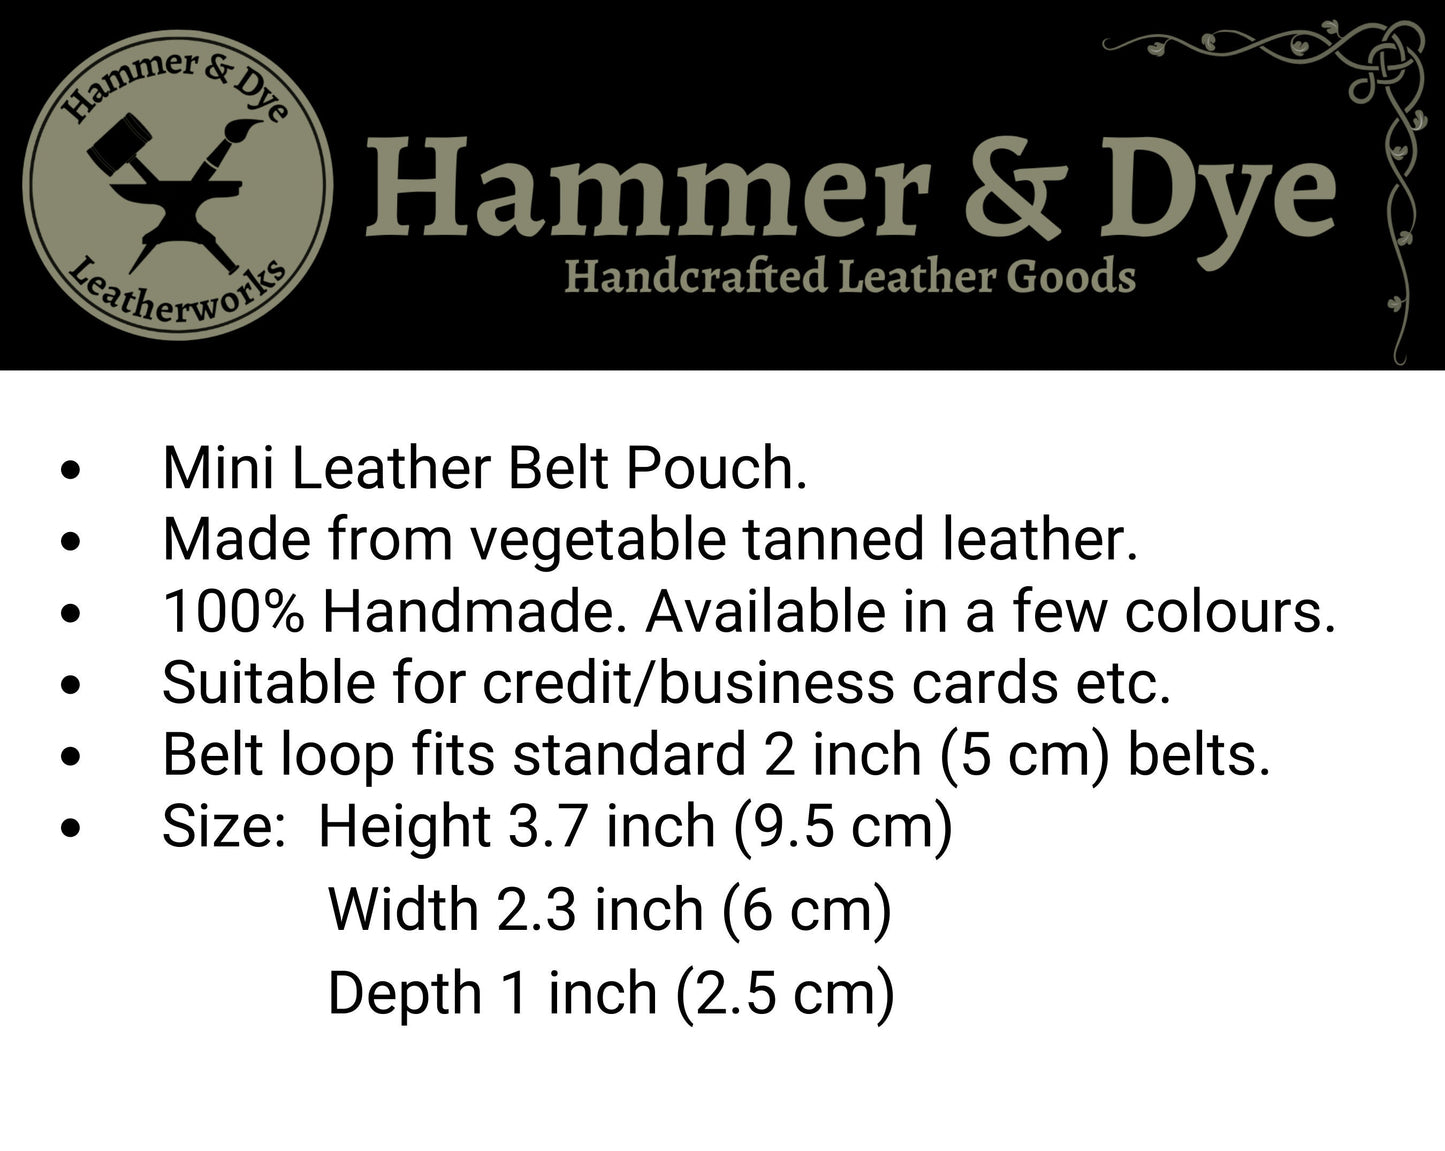 Mini Leather Belt Pouch, Ideal credit or business card holder.